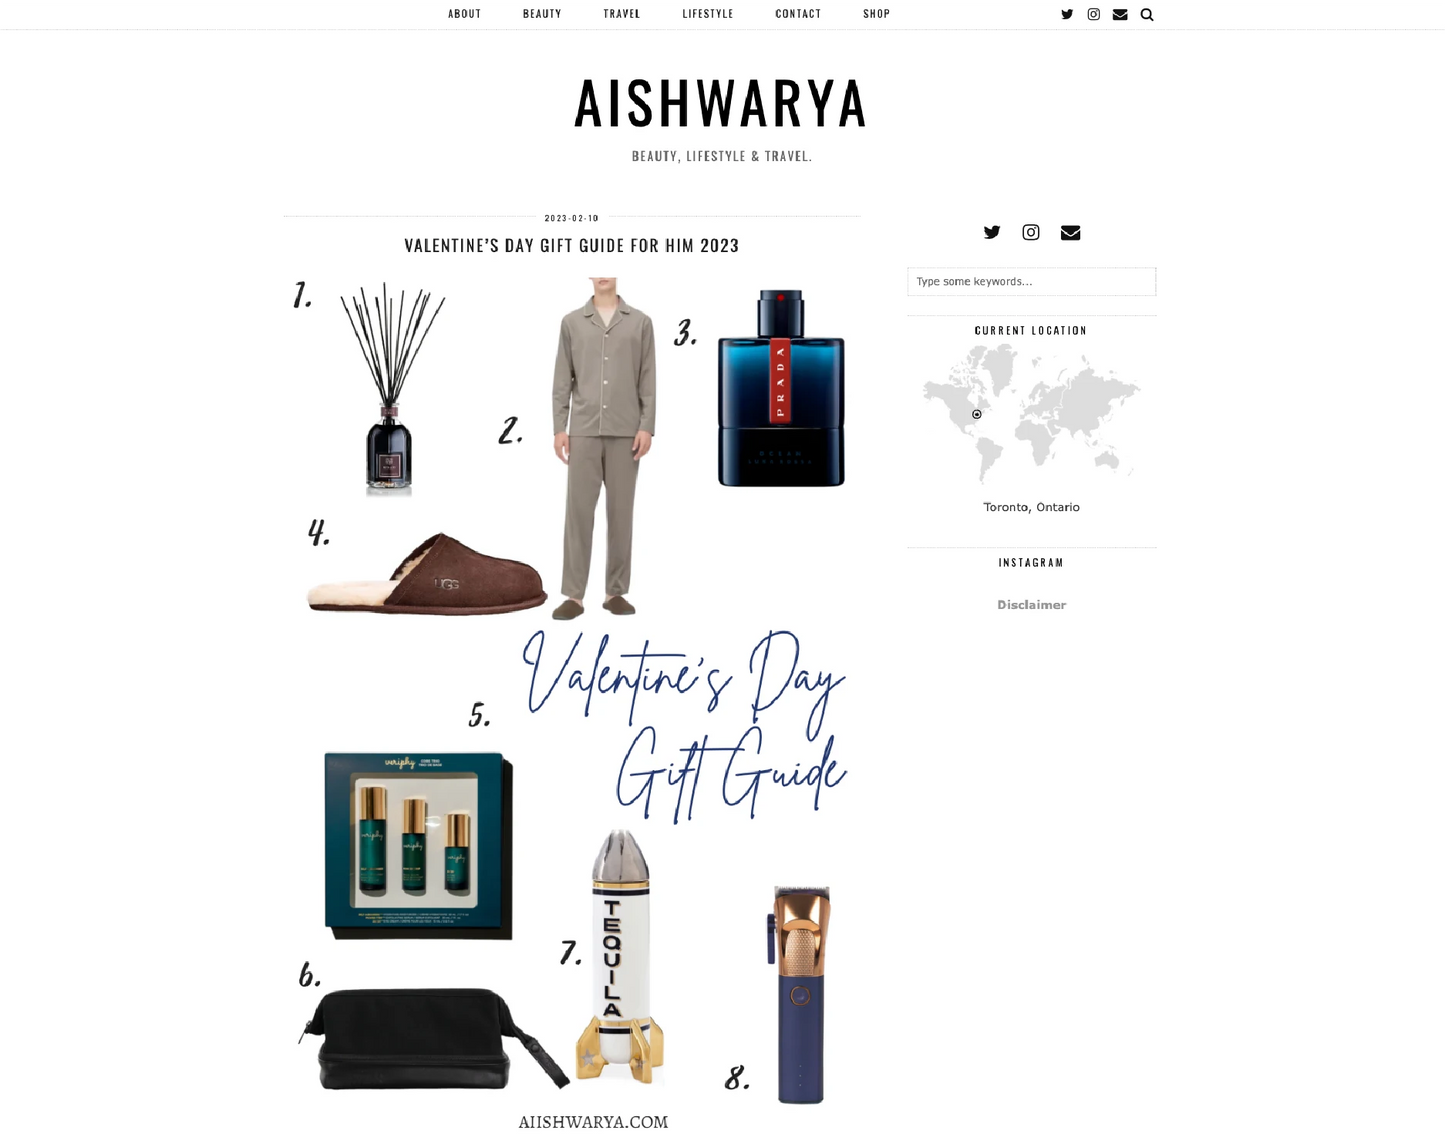 Veriphy Skincare Product featured in Aishwarya Blogger Site 